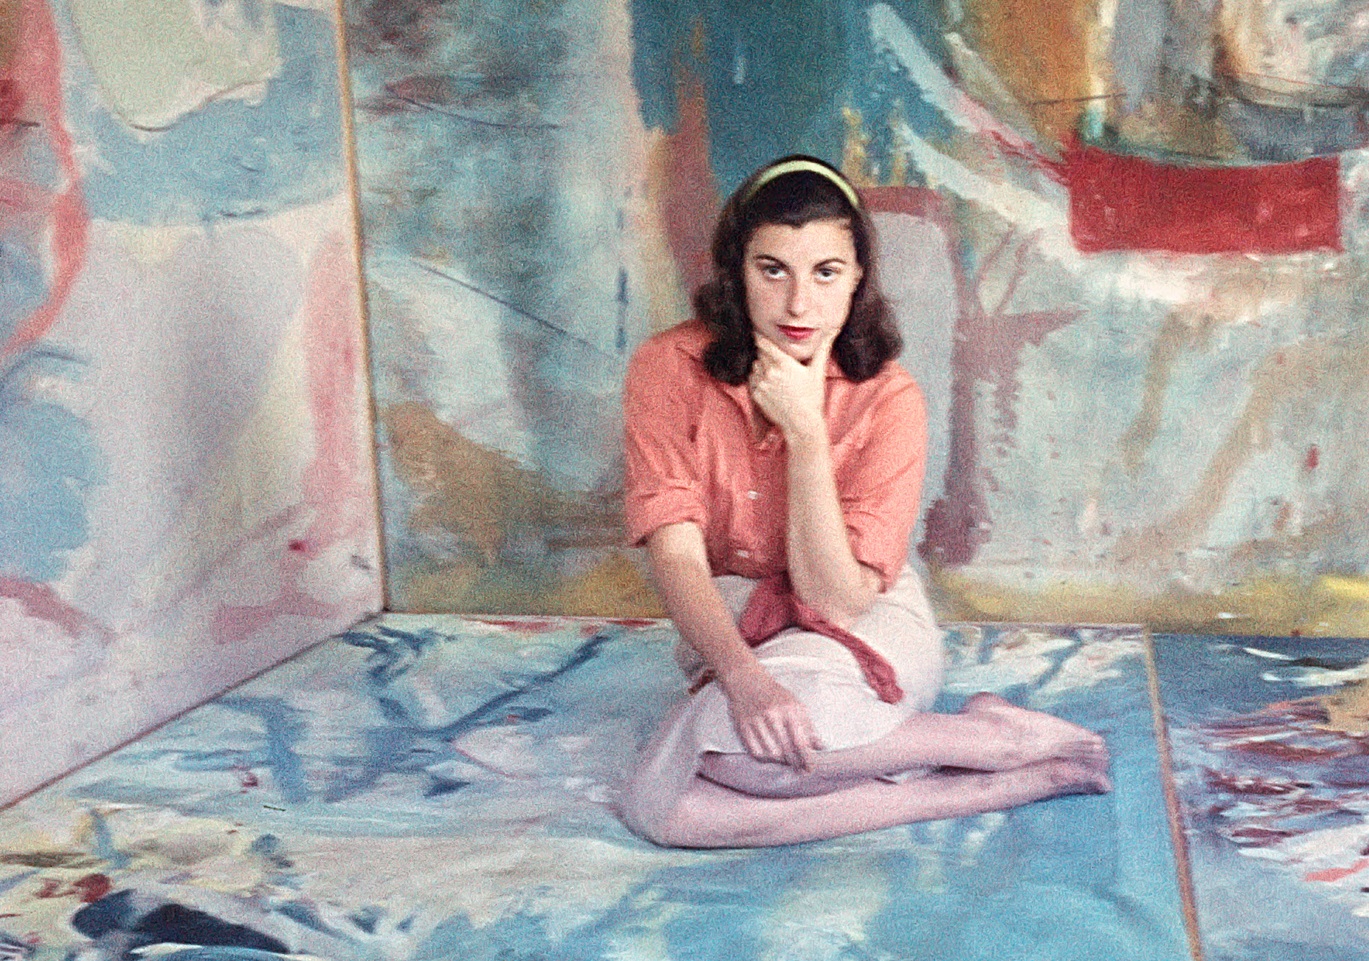 © Gordon Parks, Untitled [Helen Frankenthaler surrounded by her paintings], New York, 1957, Courtesy of and © The Gordon Parks Foundation